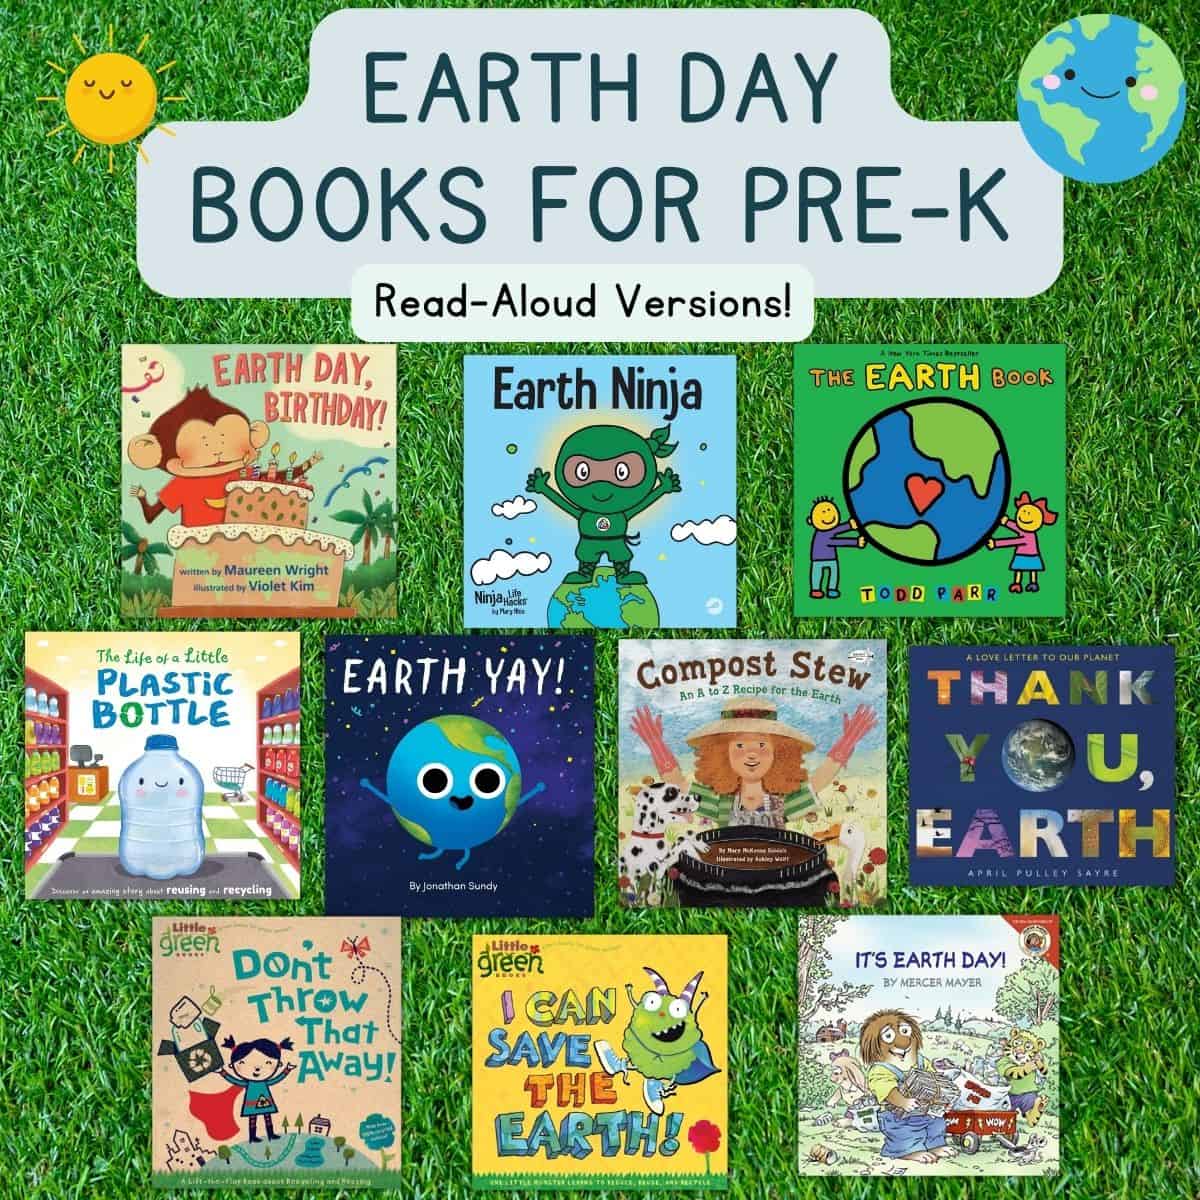 Graphic with collage of book covers showing 10 Earth Day Books for Preschool. 